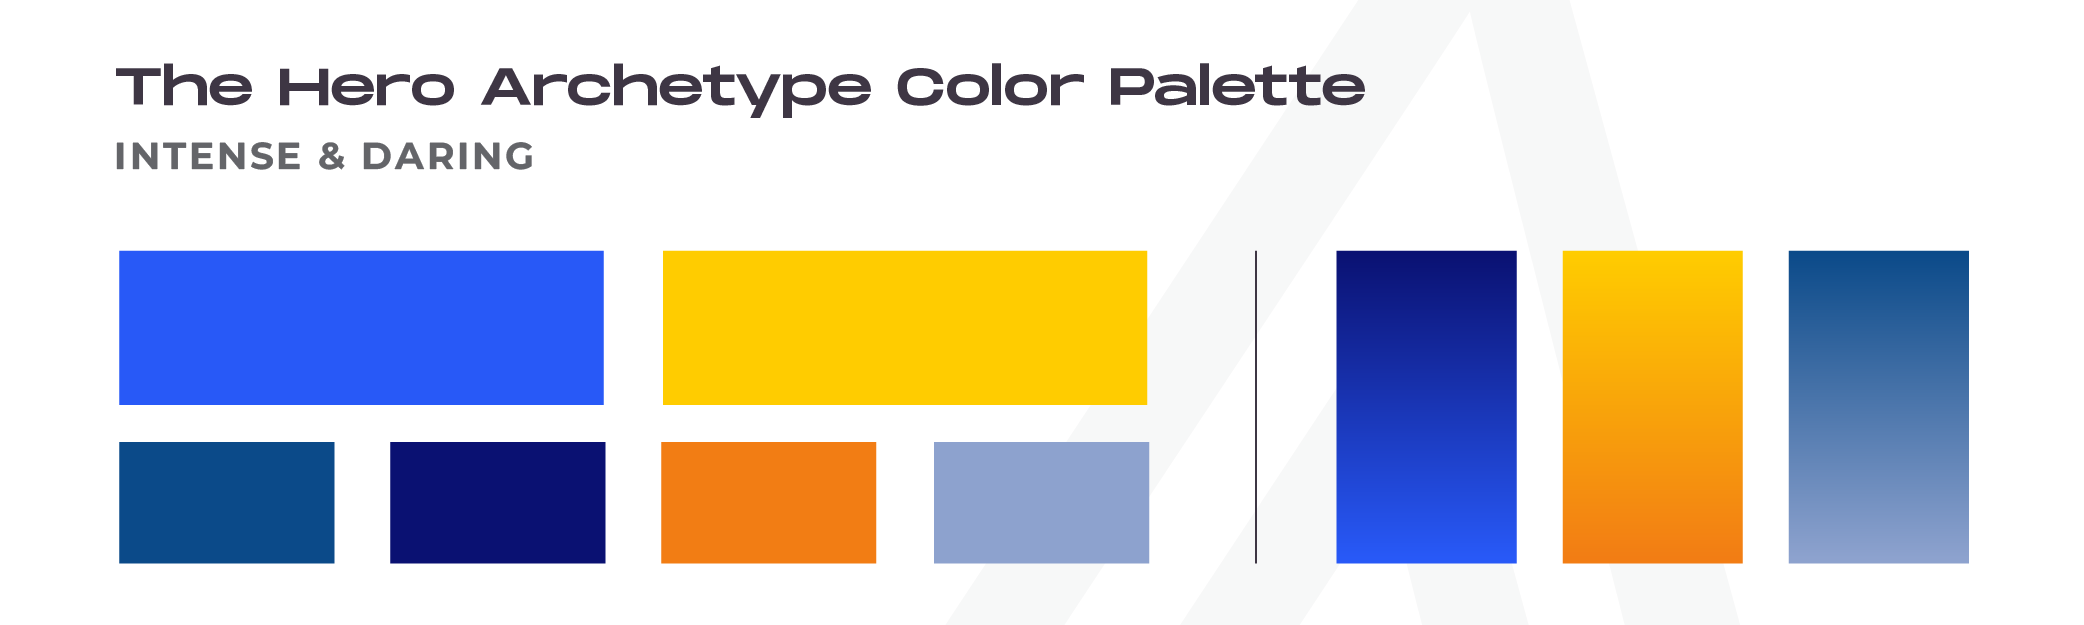 Brand Archetypes Color Palettes_The Hero